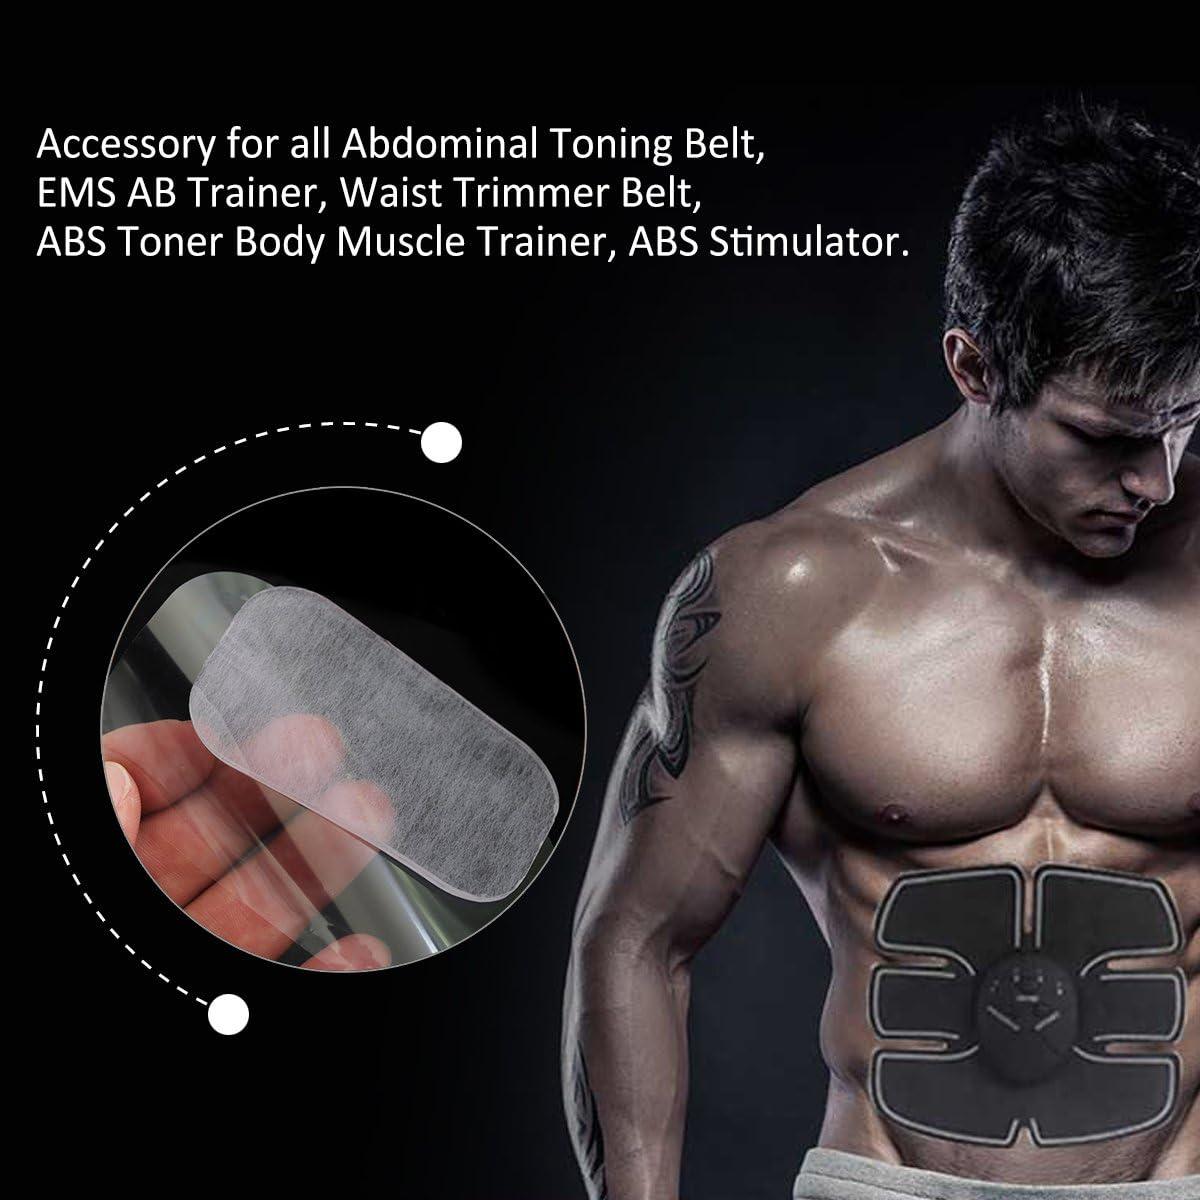 PAMASE 50Pcs/80Pcs Abs Stimulator Training Replacement Gel Sheet Pads for  Abdominal Muscle Trainer, Accessory for Ab Workout Toning Belt abs  pads-50pcs